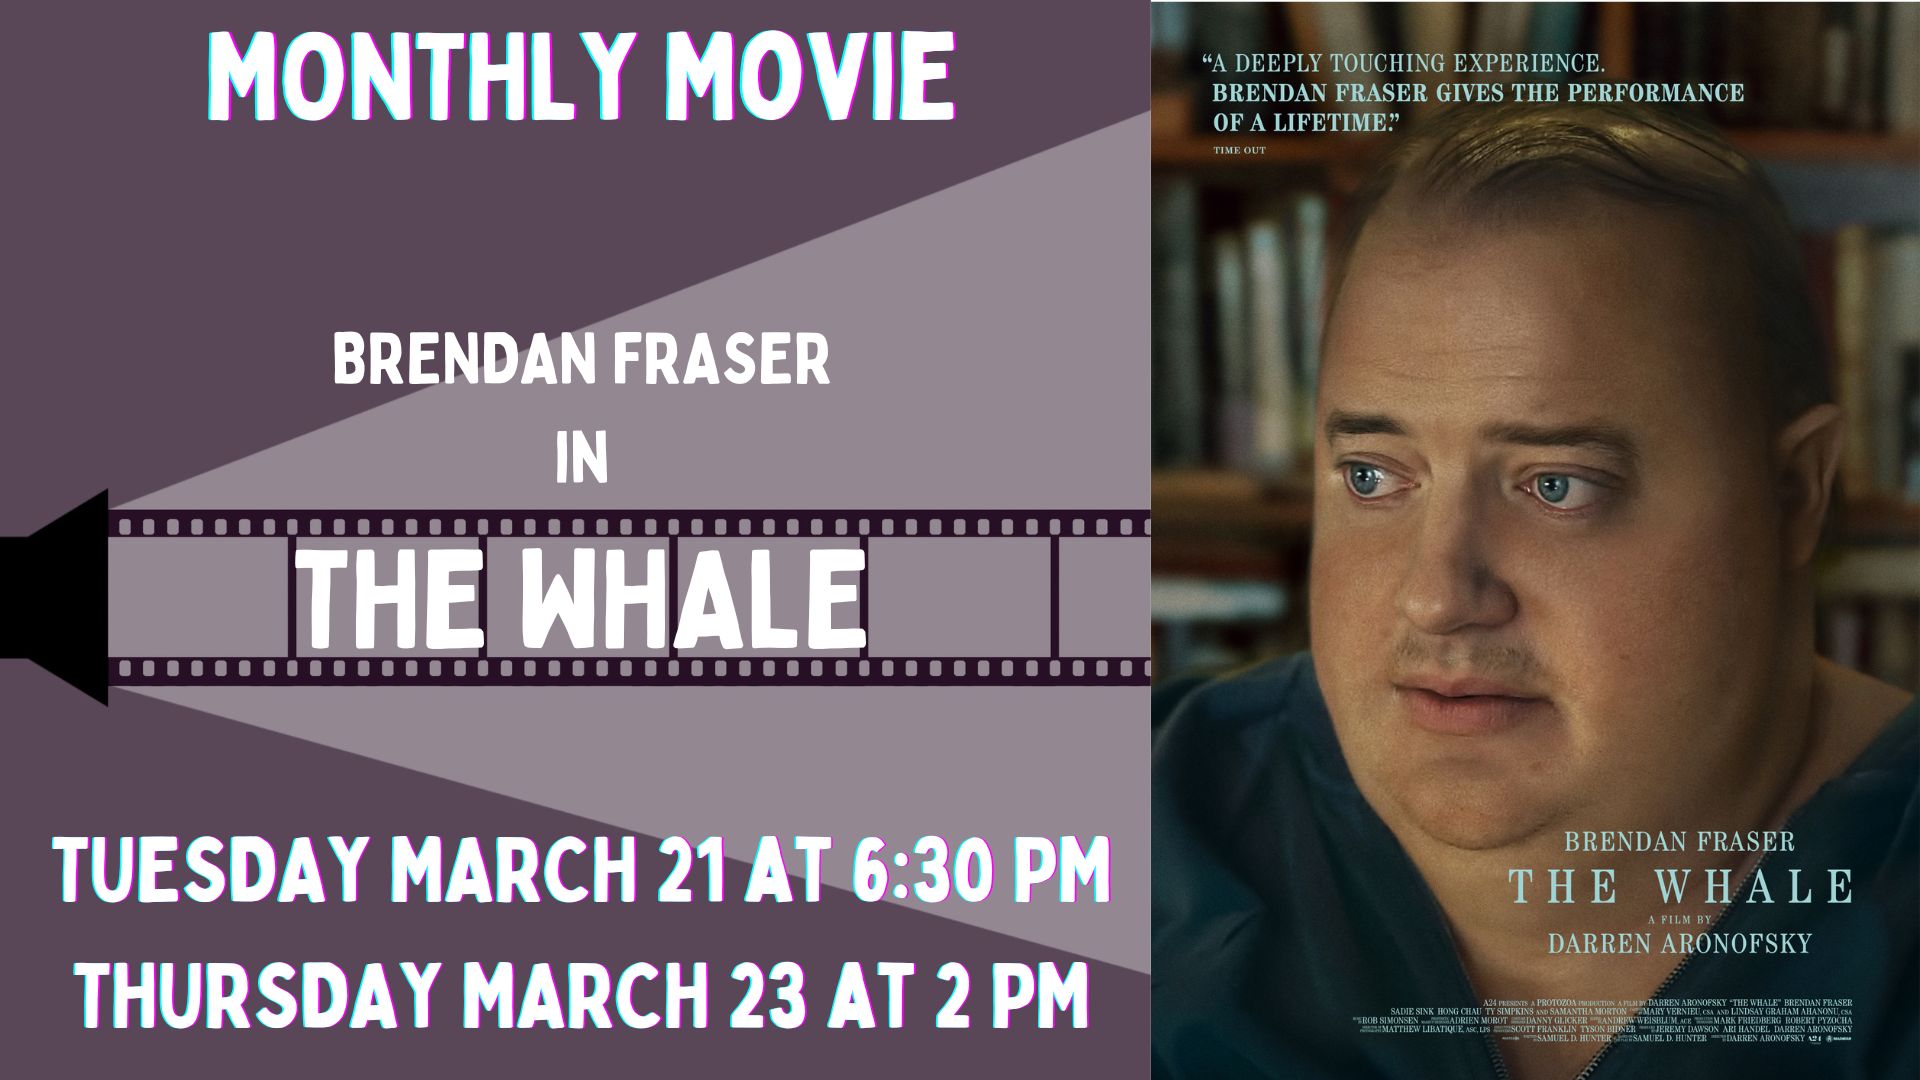 Banner advertising our screening of THE WHALE on March 23 at 2 PM